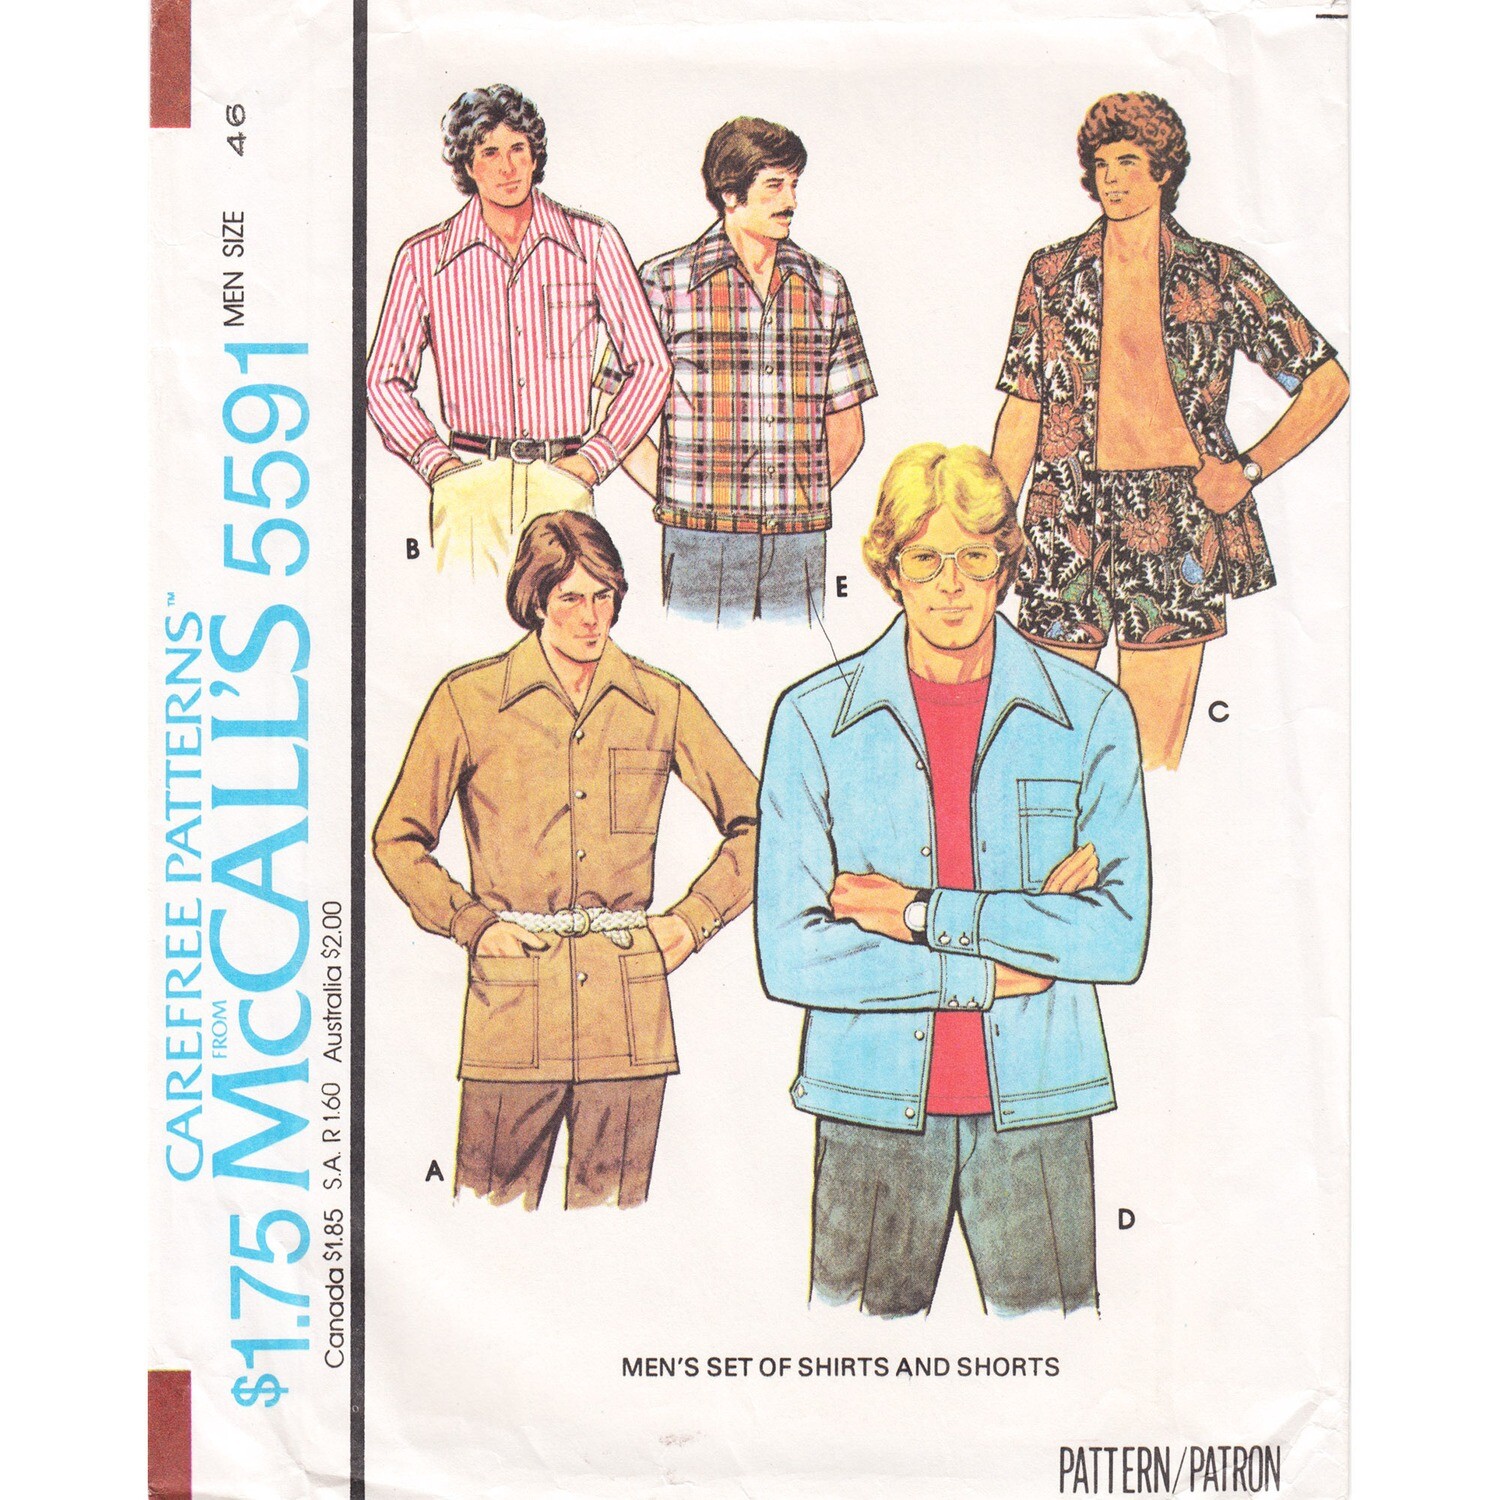 Men's 70s Shirt and Shorts Sewing Pattern McCall's 5591 Size 46